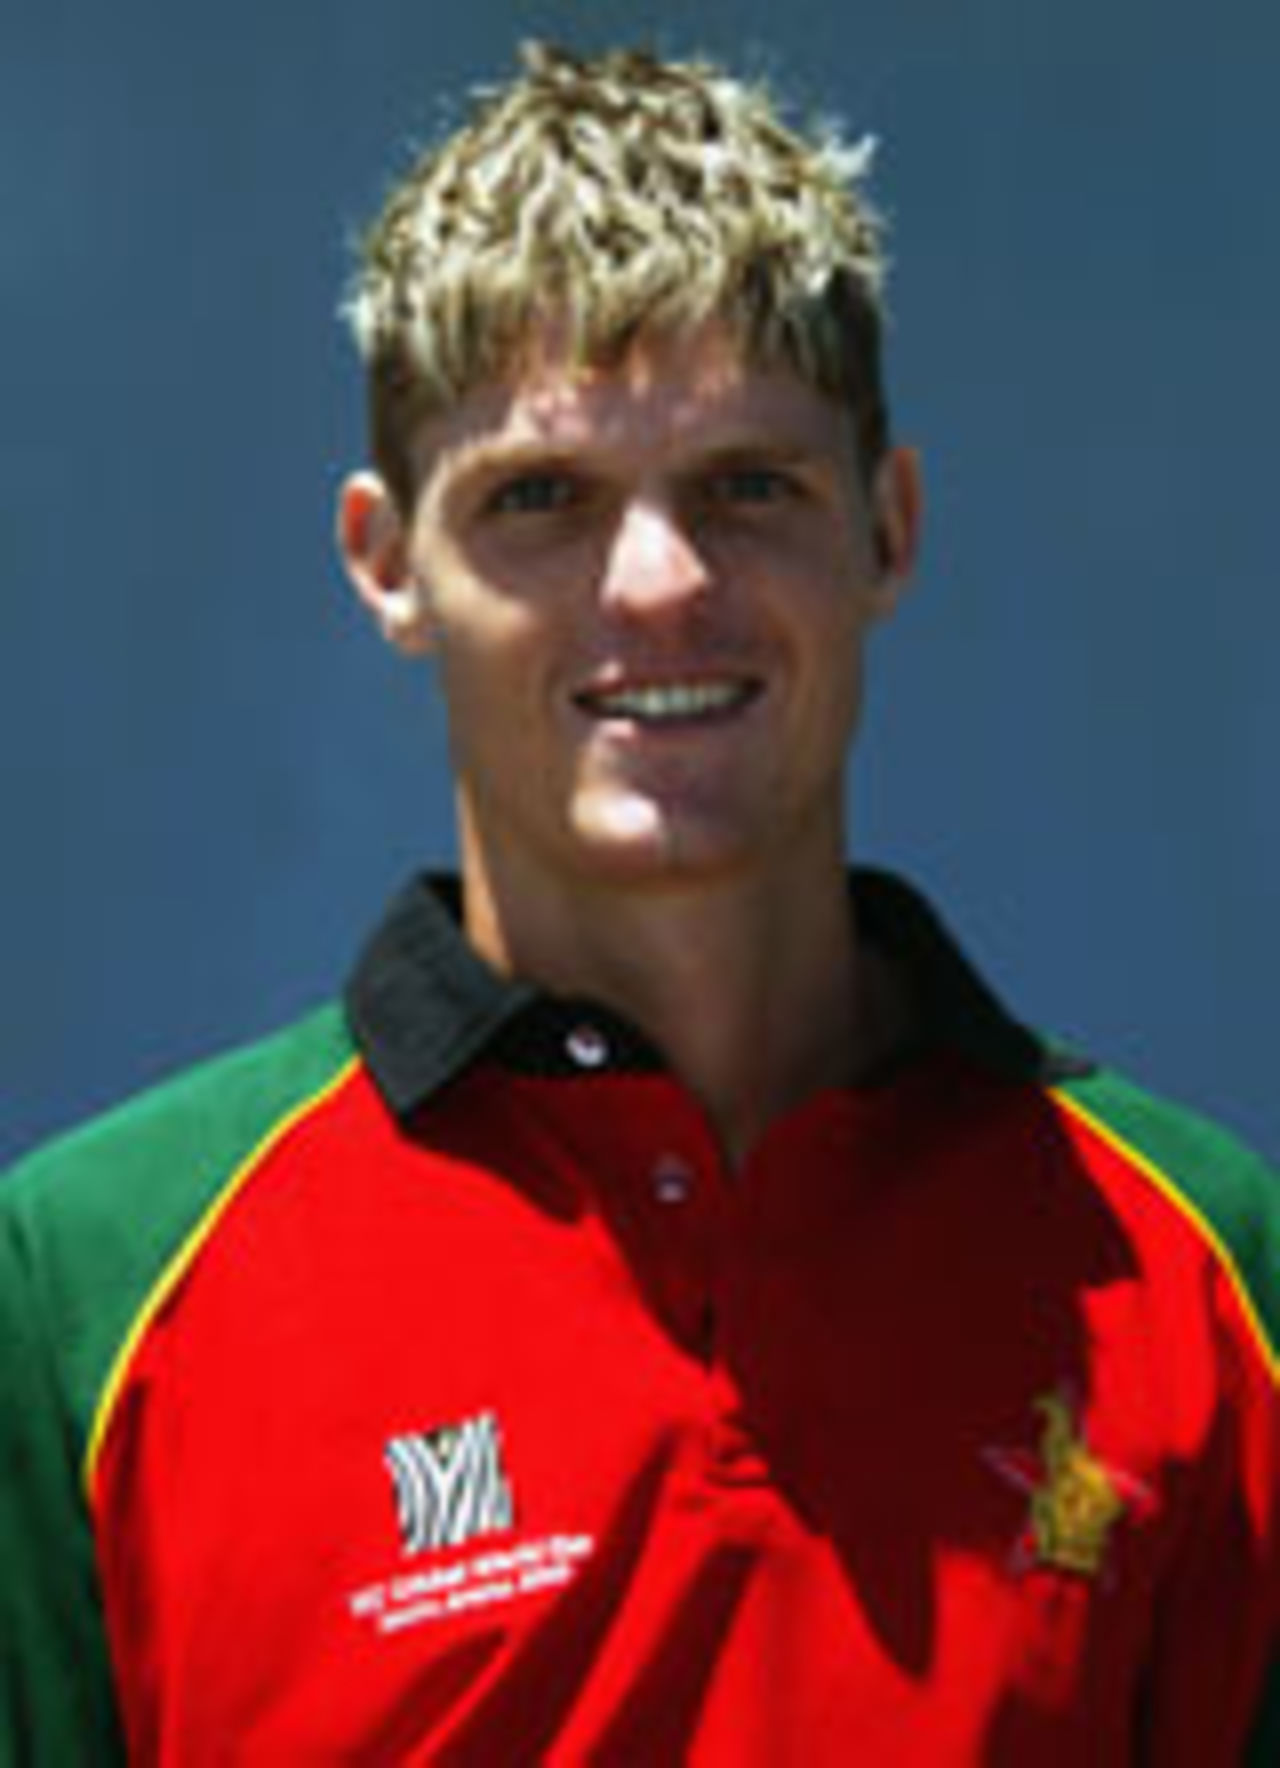 Mark Vermeulen at the World Cup, February 2003